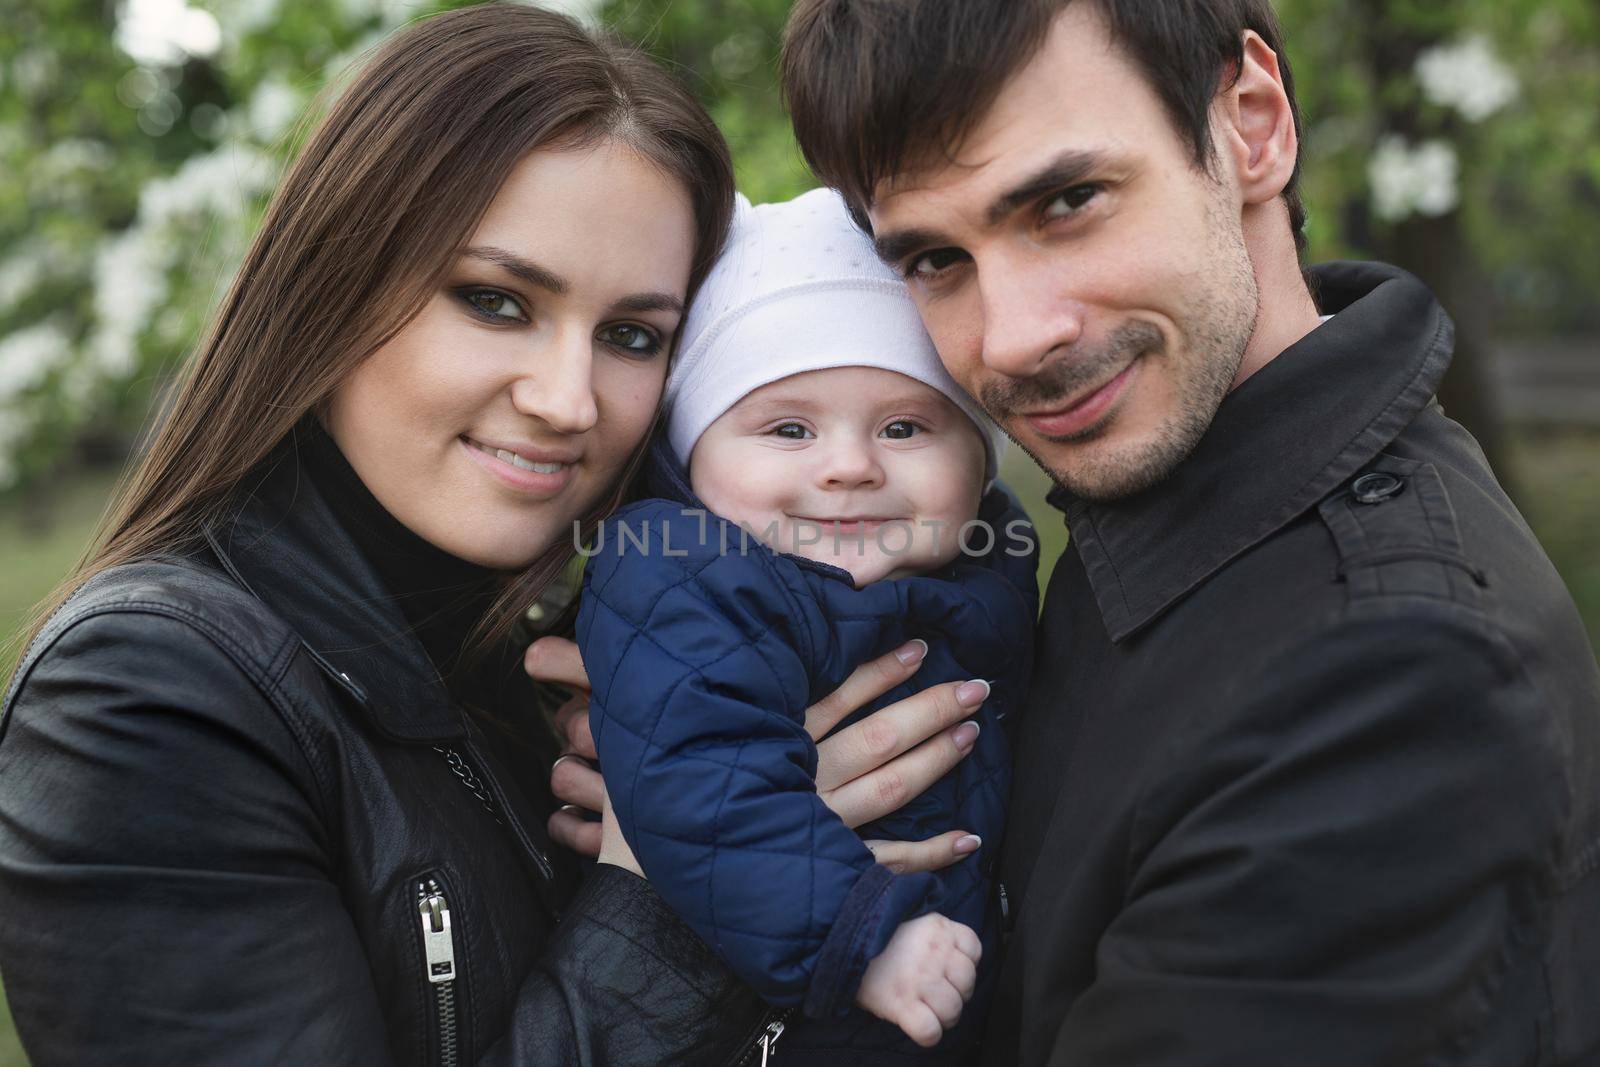 Beautiful smiling faces of people. A happy young family from three persons